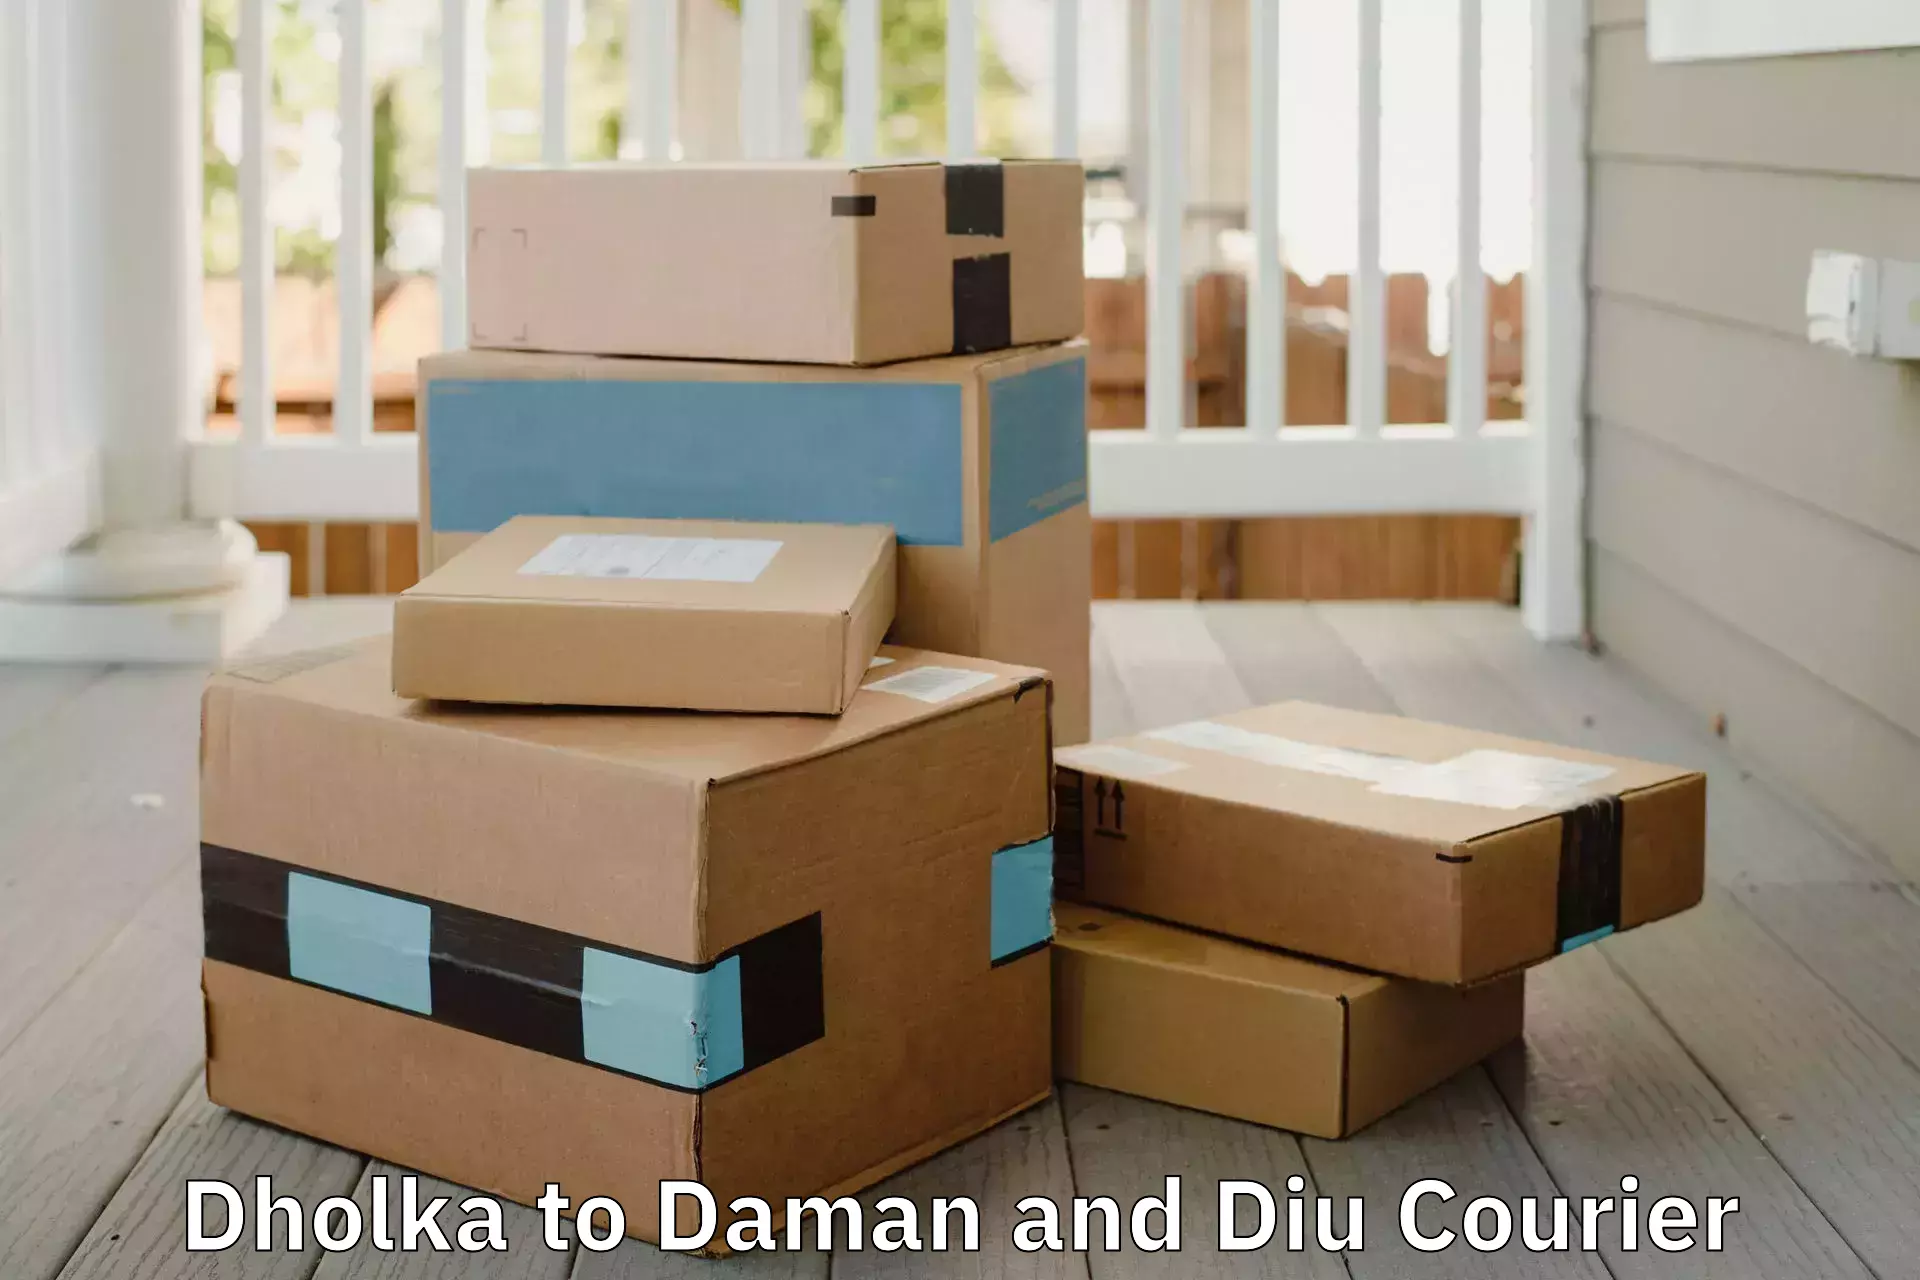 Household moving experts Dholka to Daman and Diu